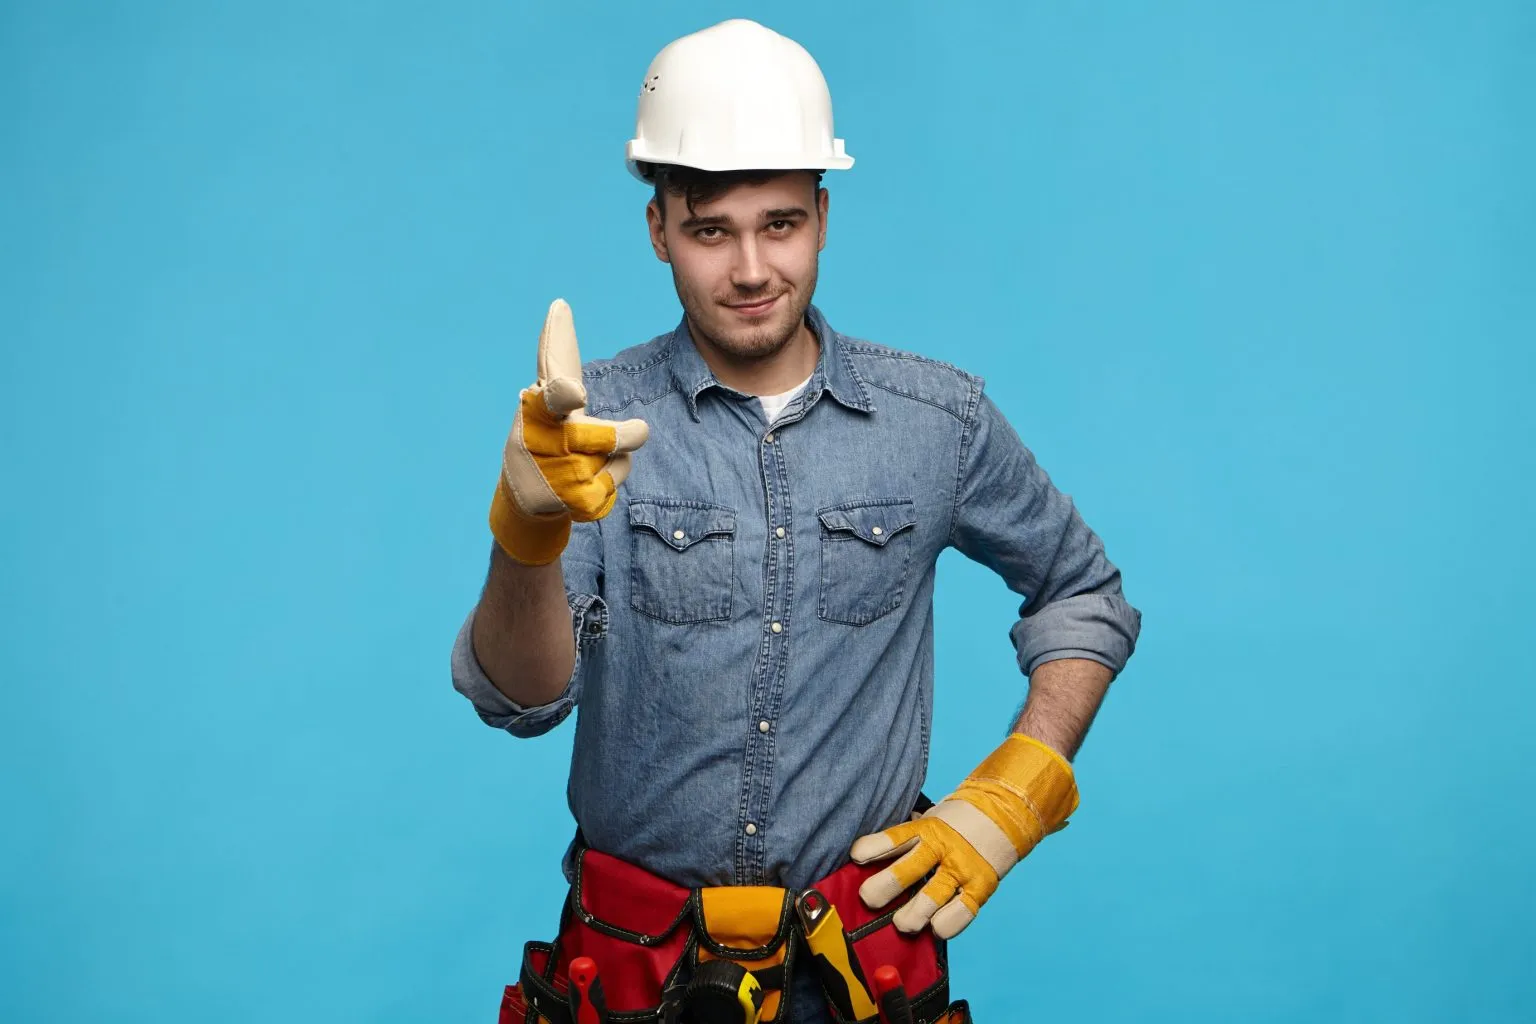 How to Find & Hire an Electrician